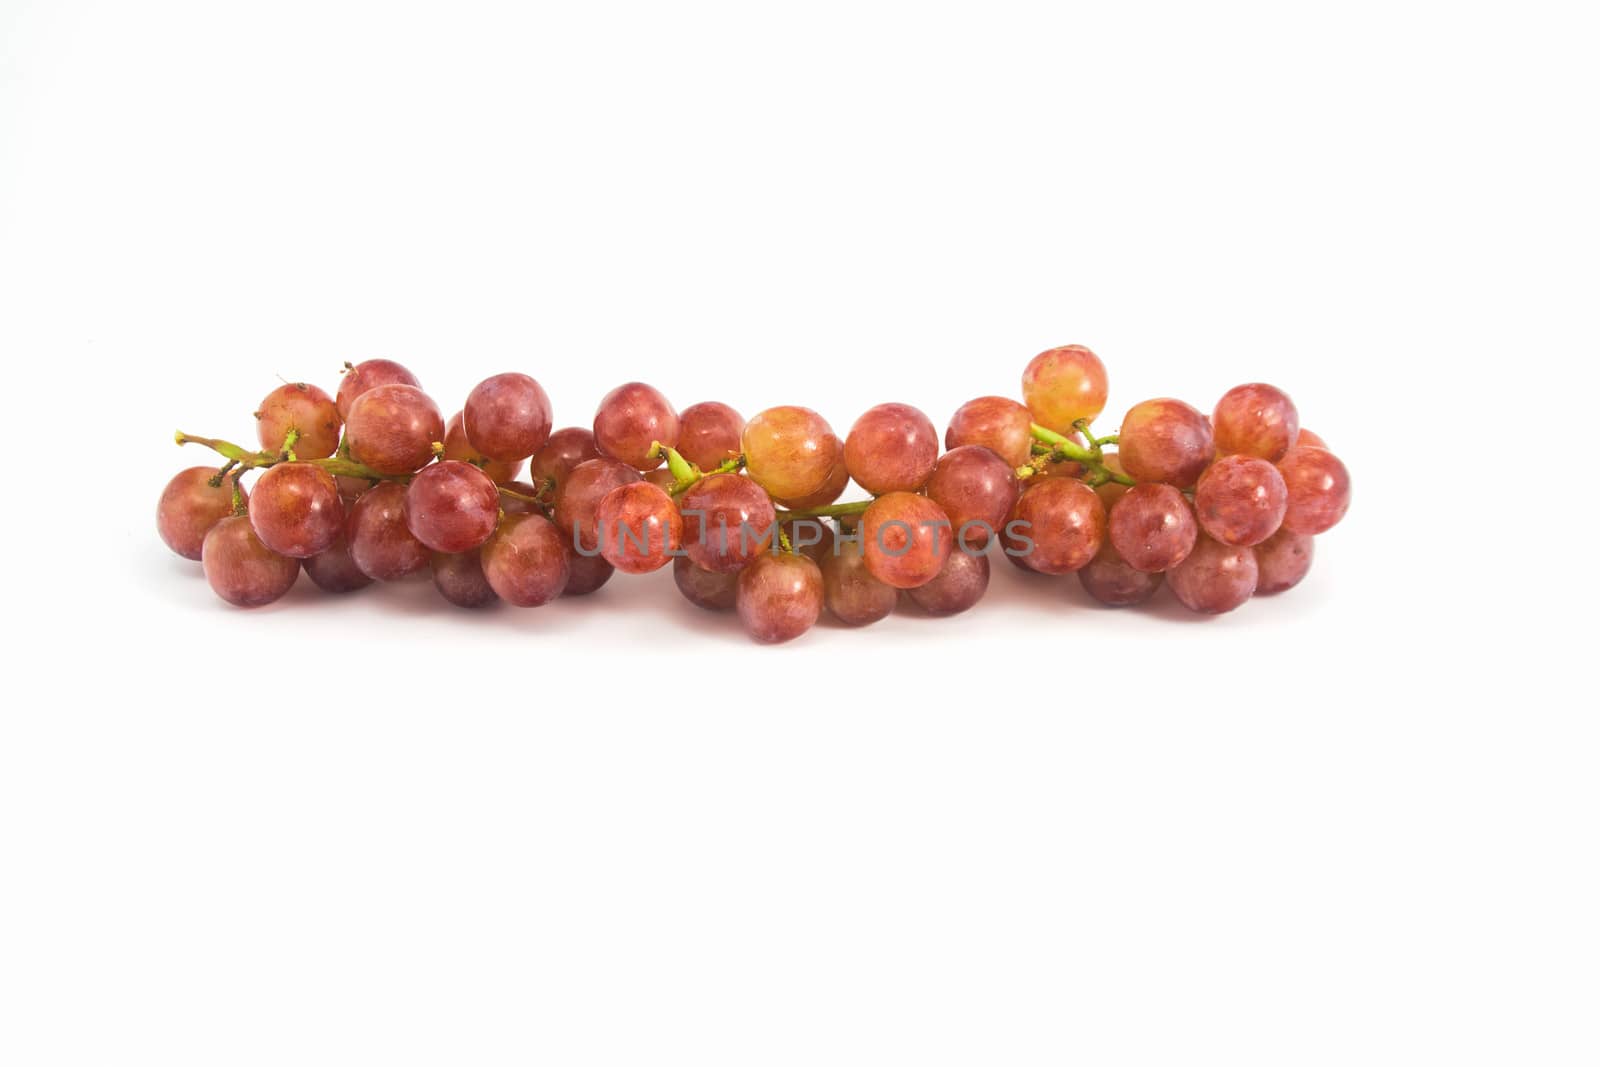 Red grapes fresh with water drops by Sorapop